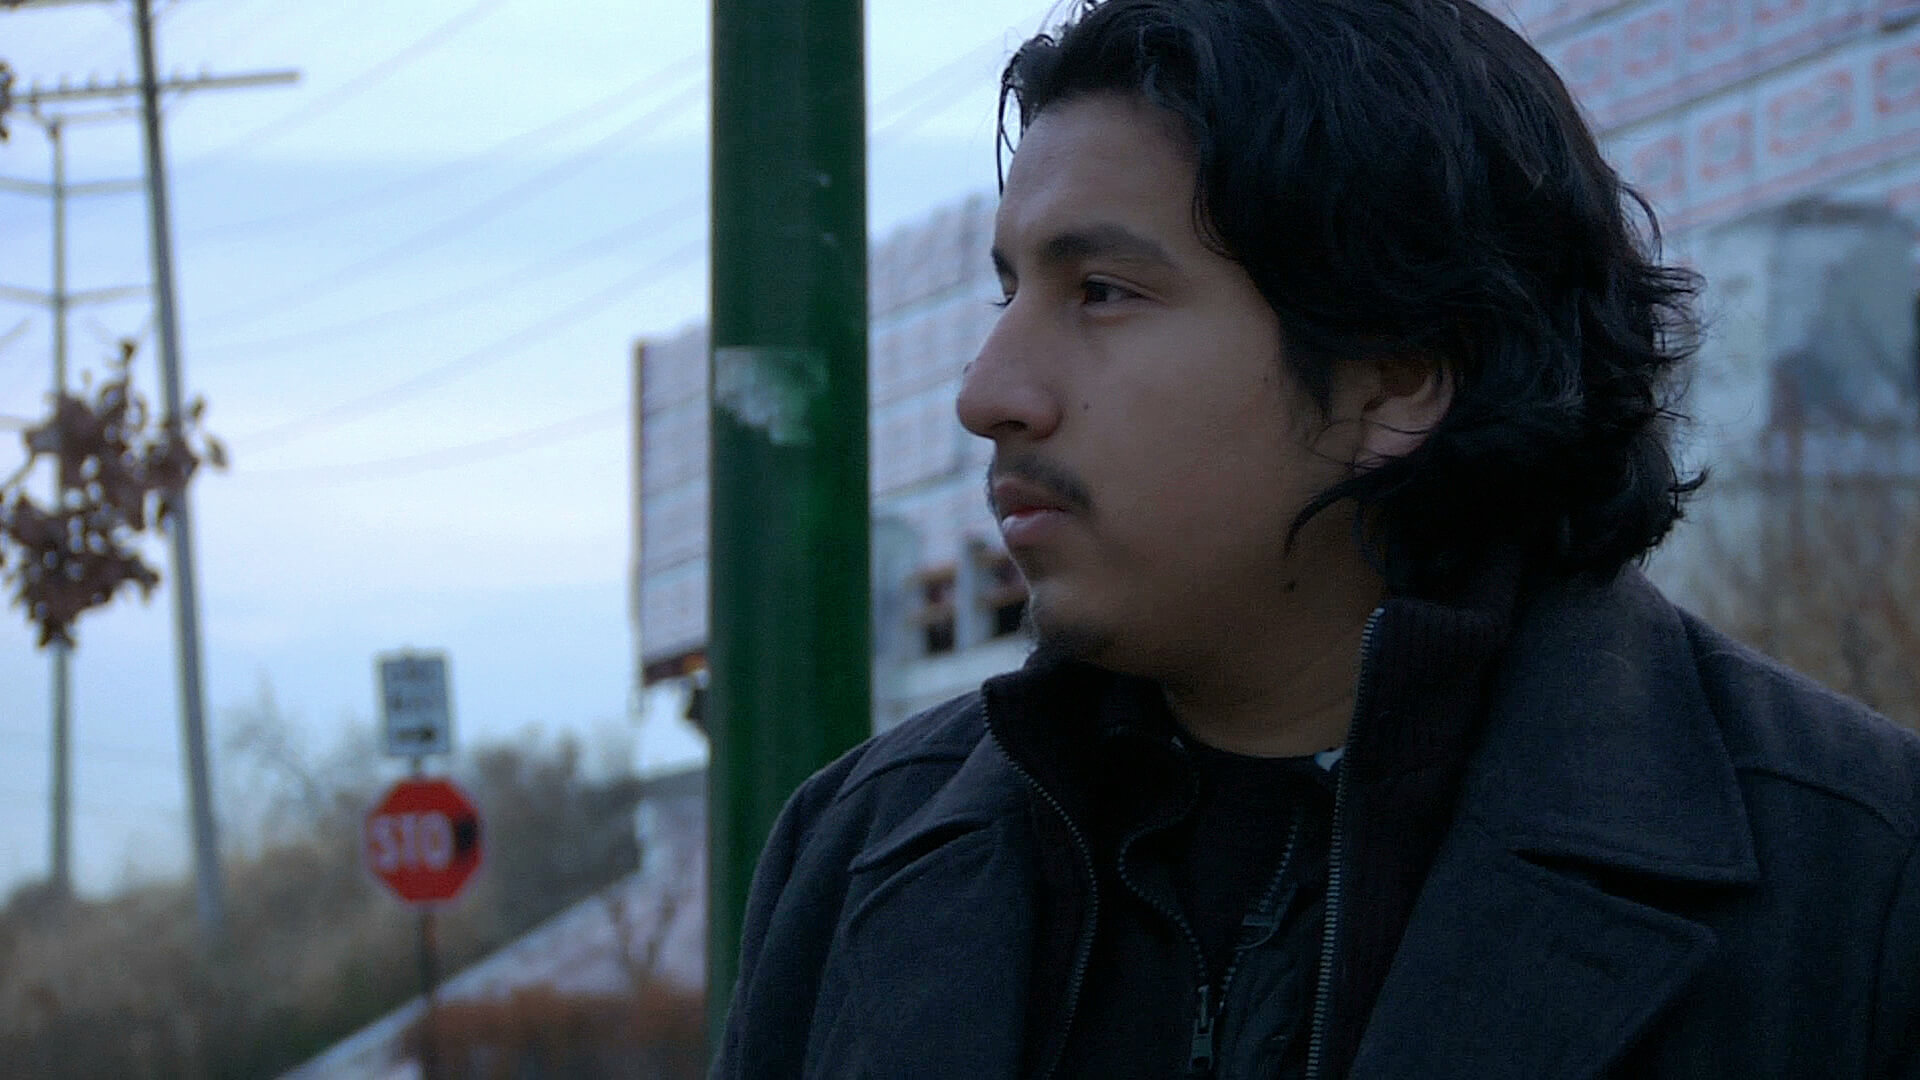 A still from The Homestretch. A close-up shot of a person facing the camera, and looking off to the left of it. They are wearing a black jacket. It is daytime and the sky is cloudy.